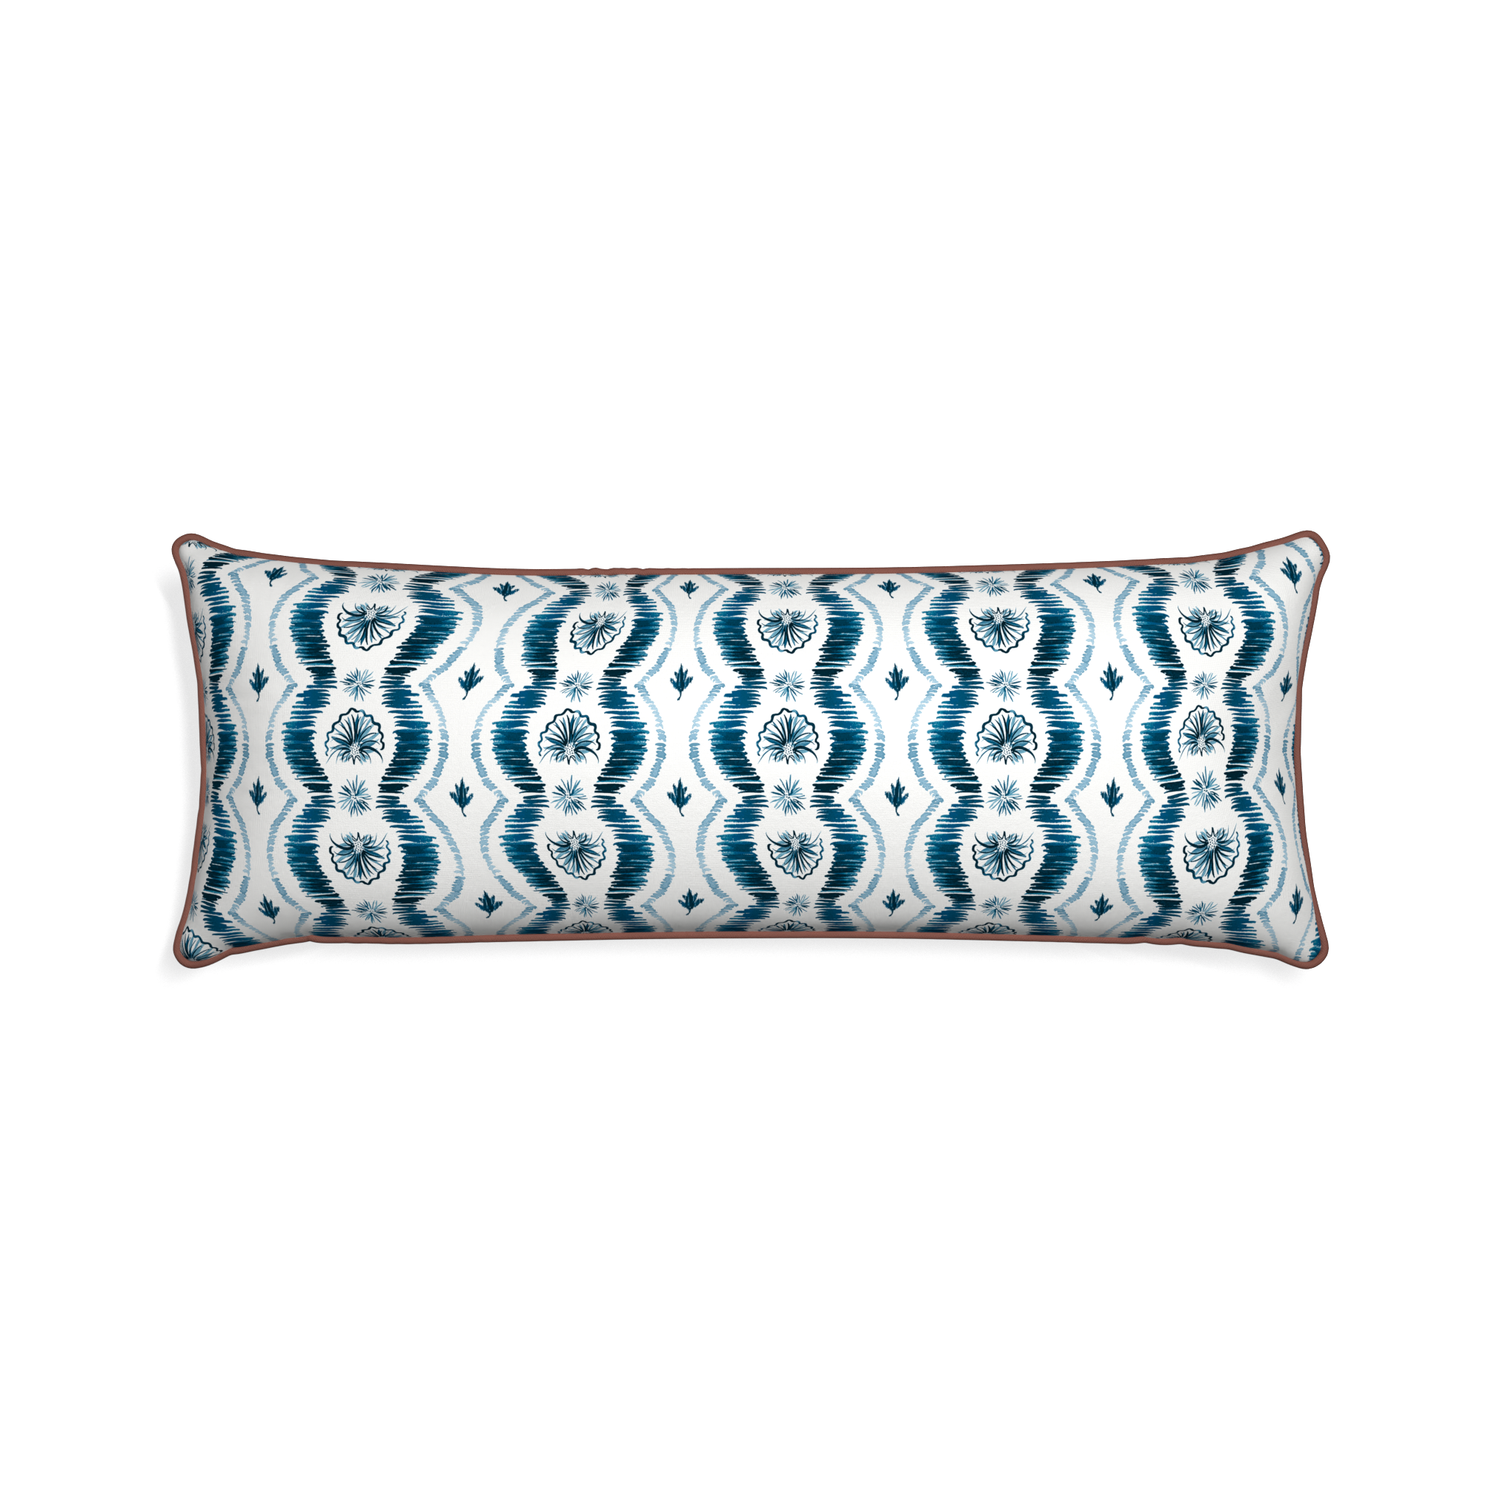 Xl-lumbar alice custom blue ikatpillow with w piping on white background